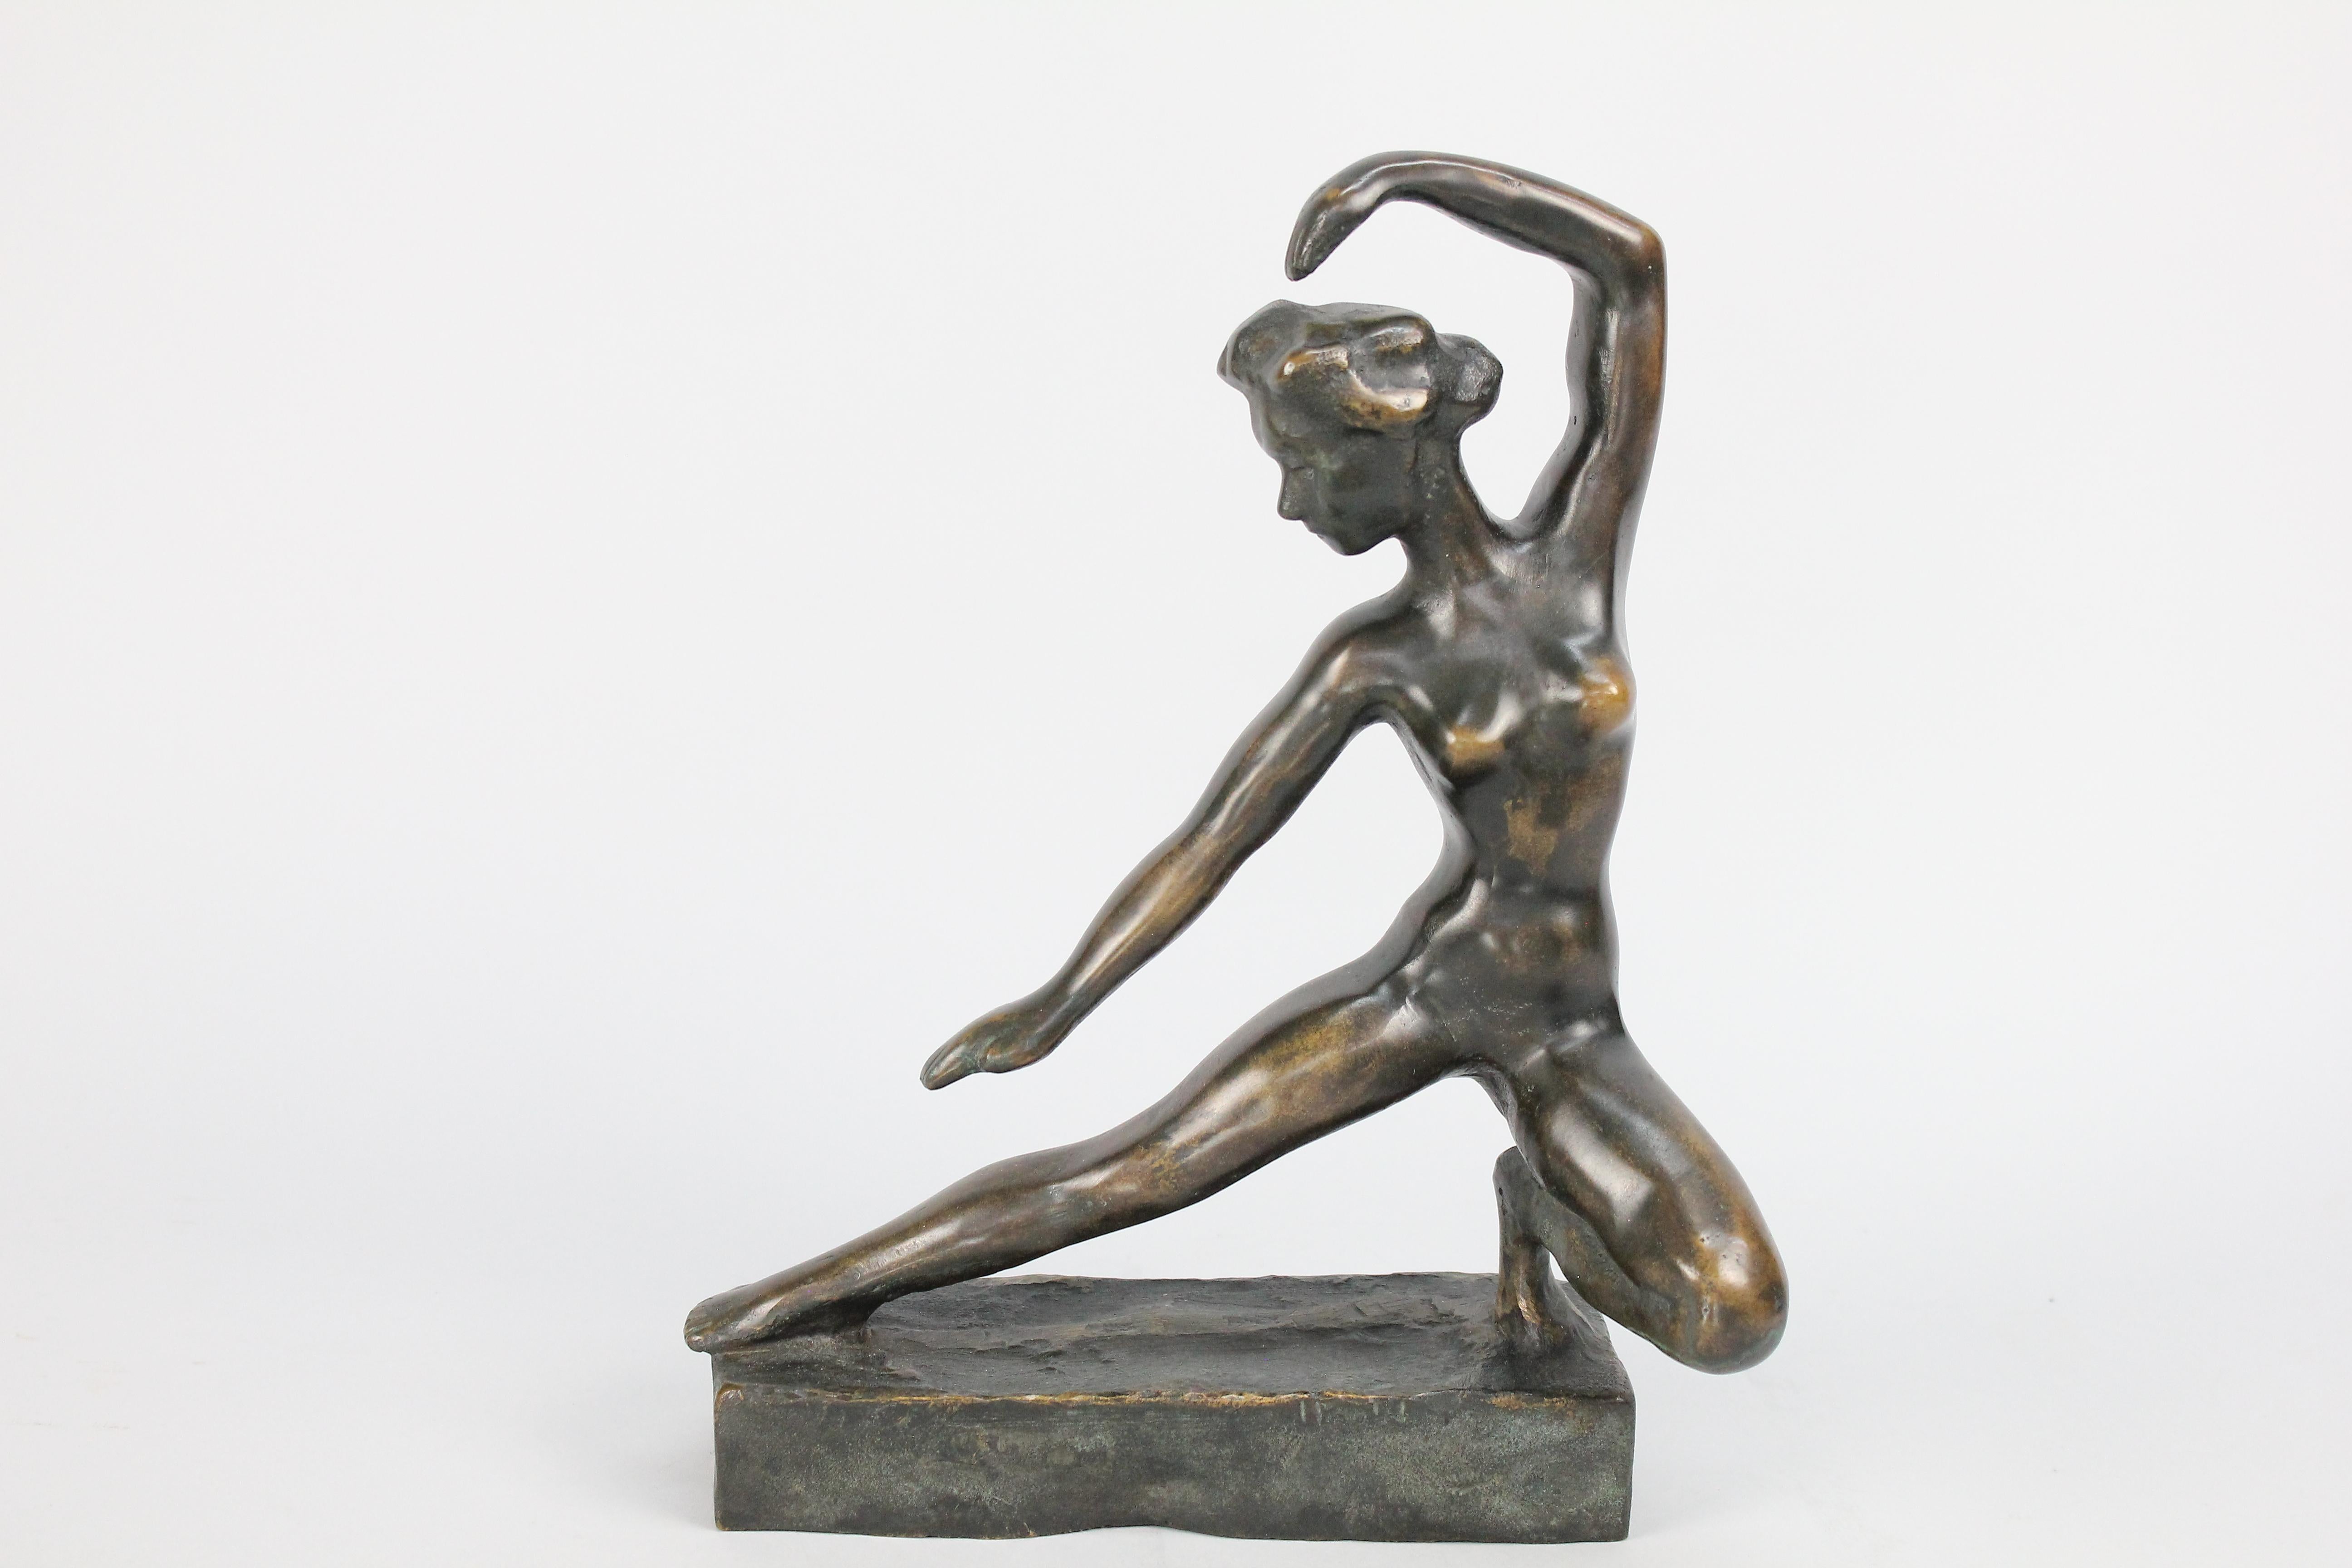 A mid-century young nude ballerina cast in bronze by Swedish sculpture Sigge Berggren.

Cast in bronze and patinated in dark brown. Signed 